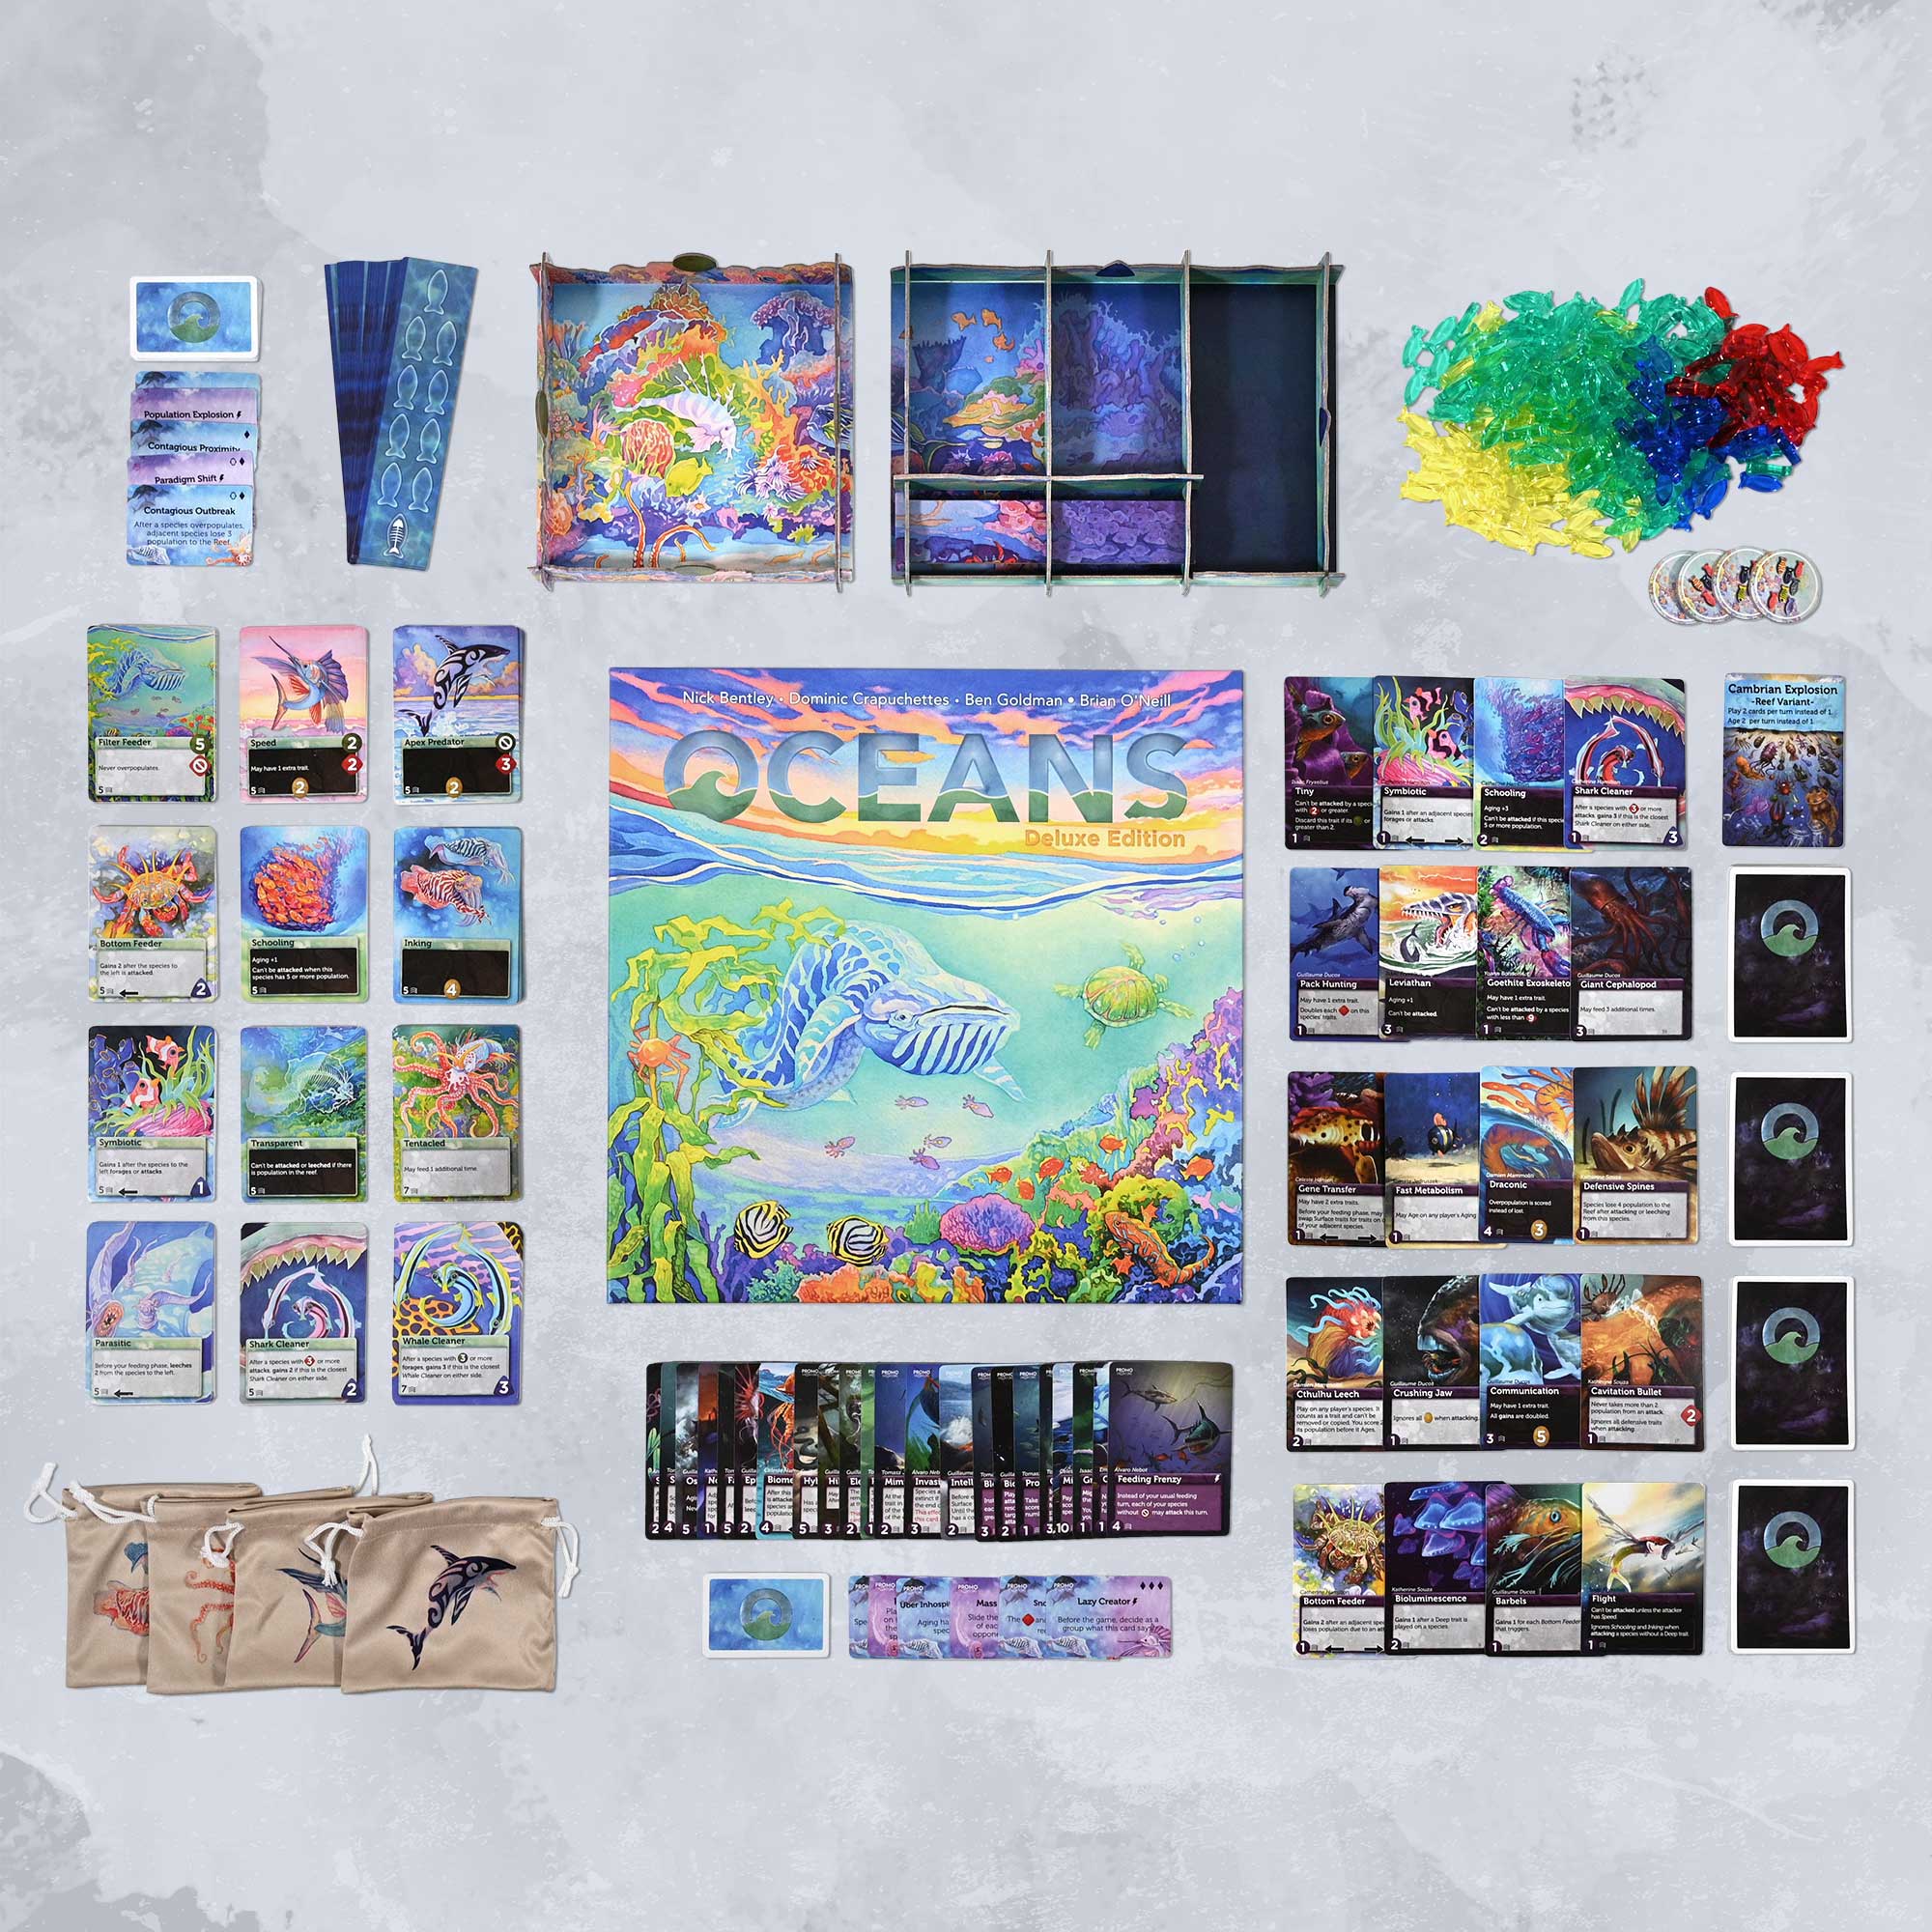 Oceans Deluxe Edition Contents